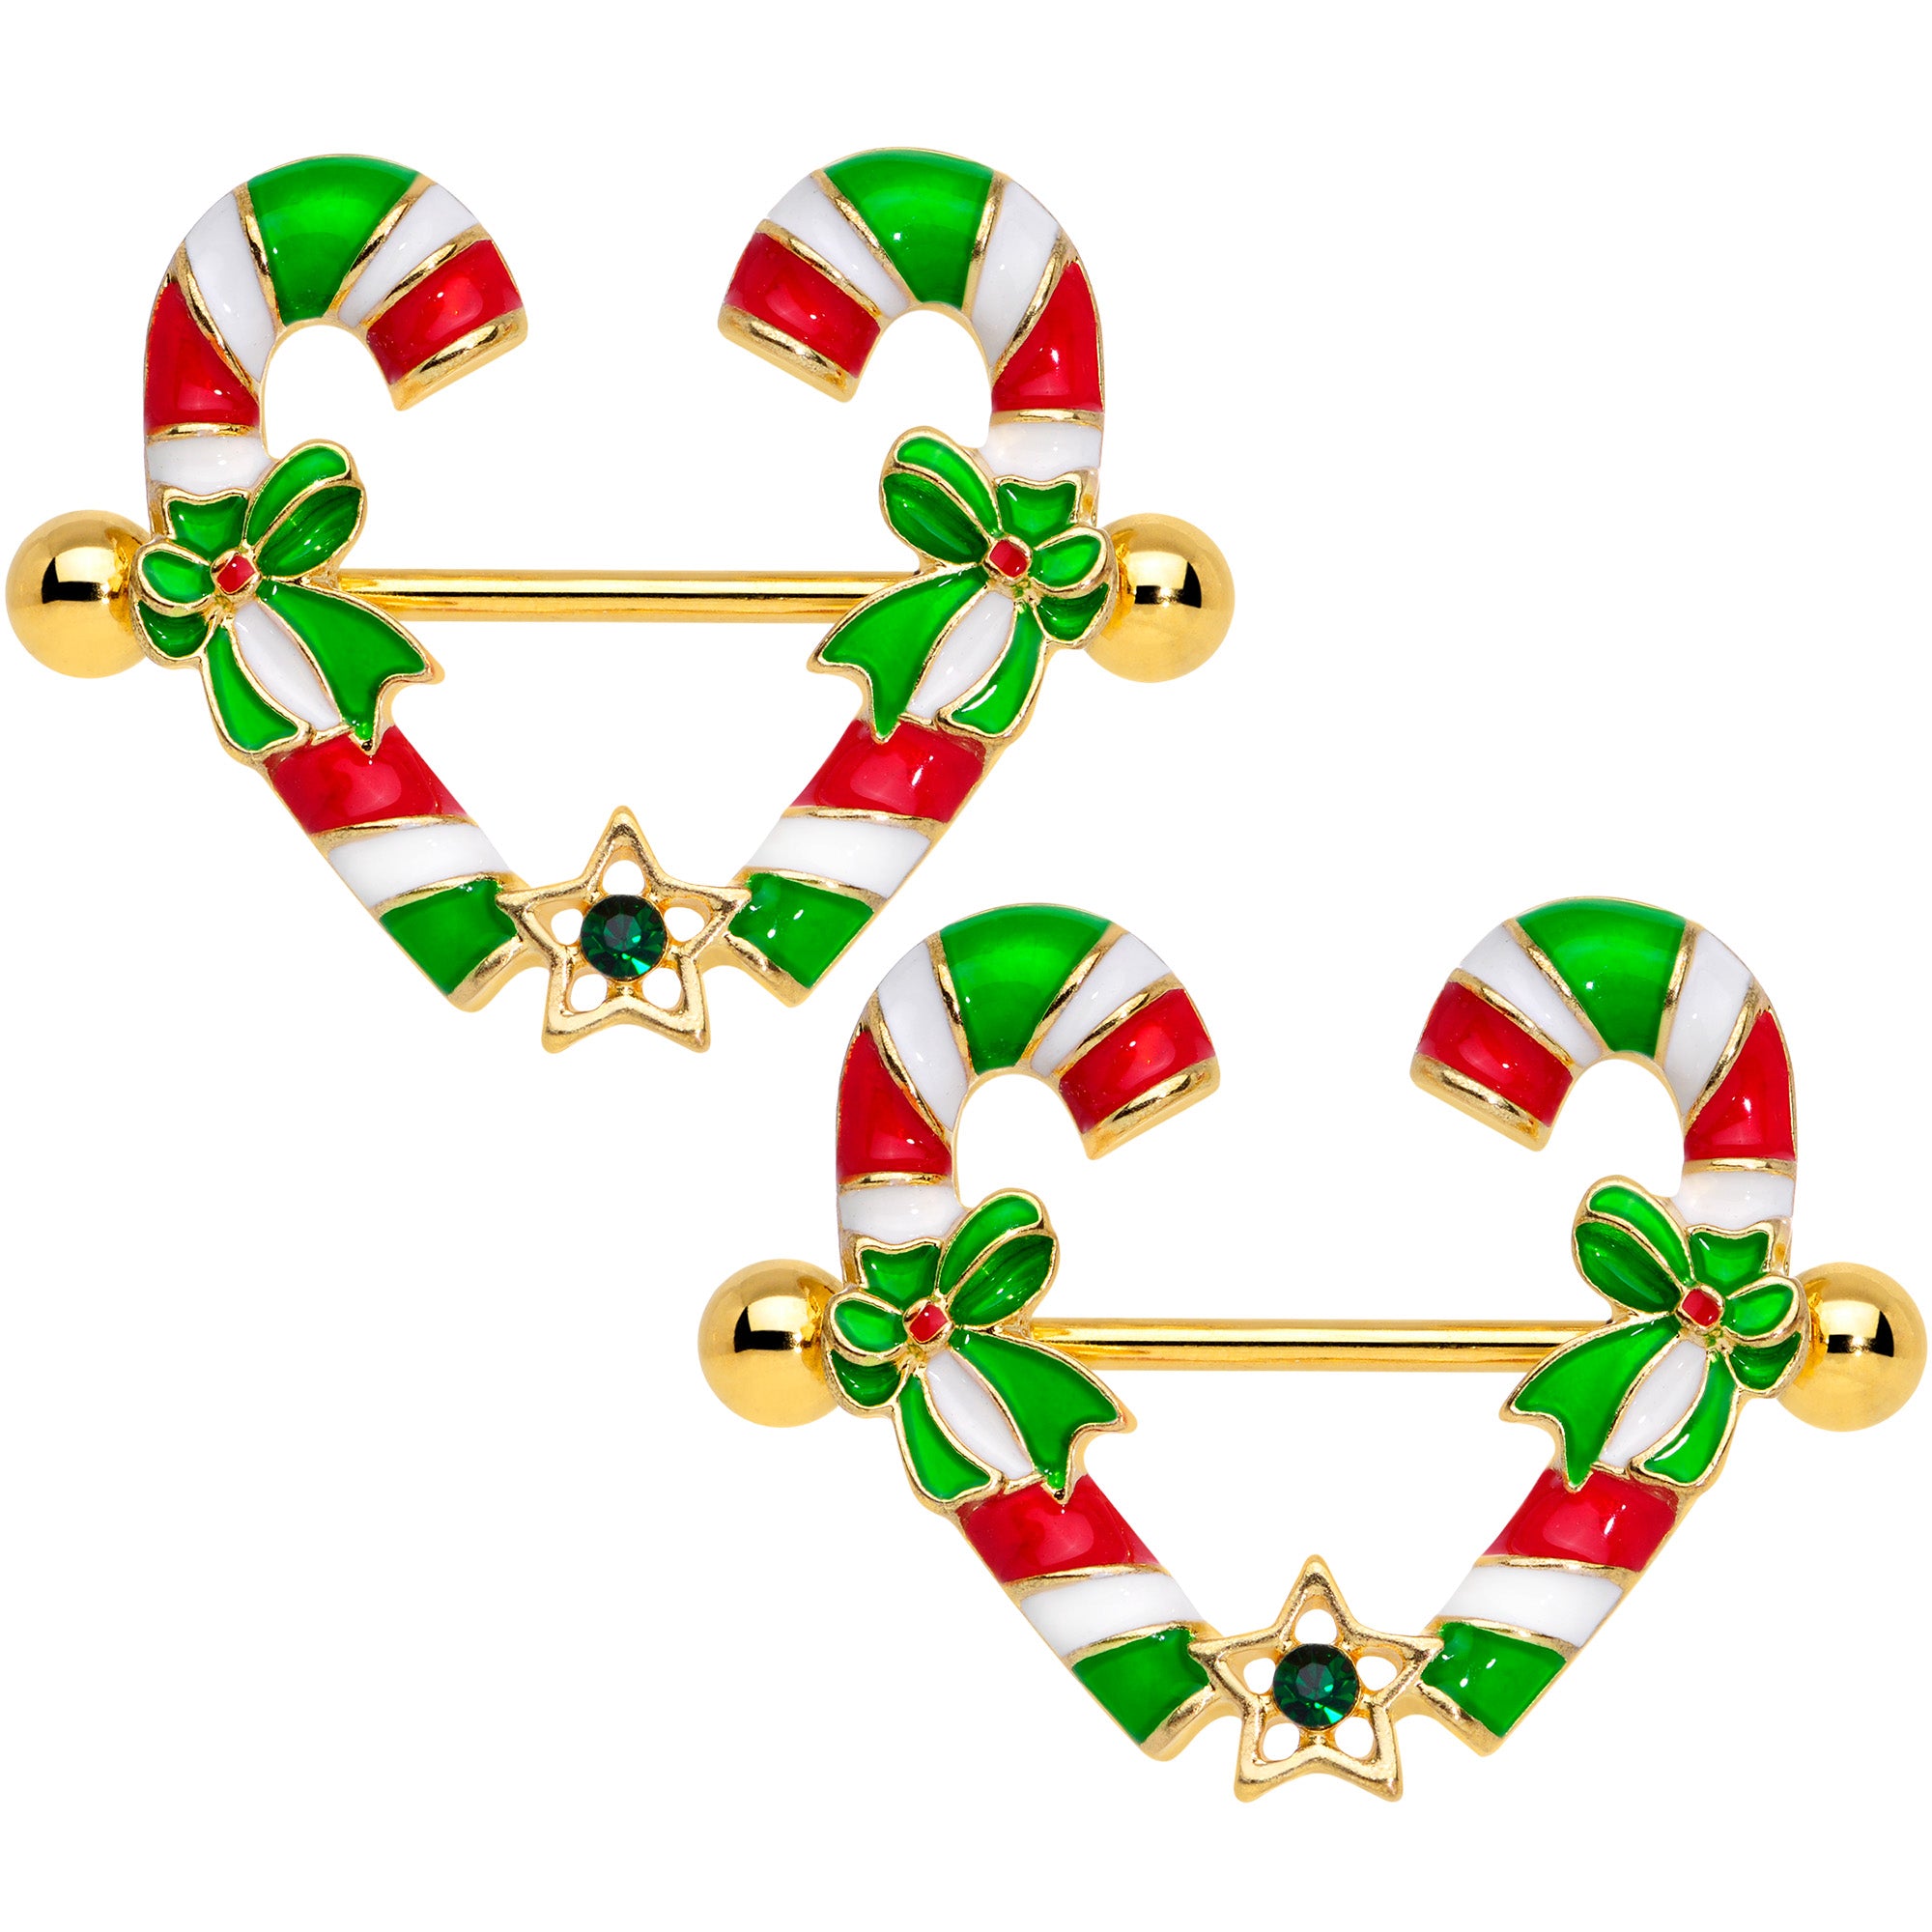 8 precious jewels to bedazzle your love this Christmas